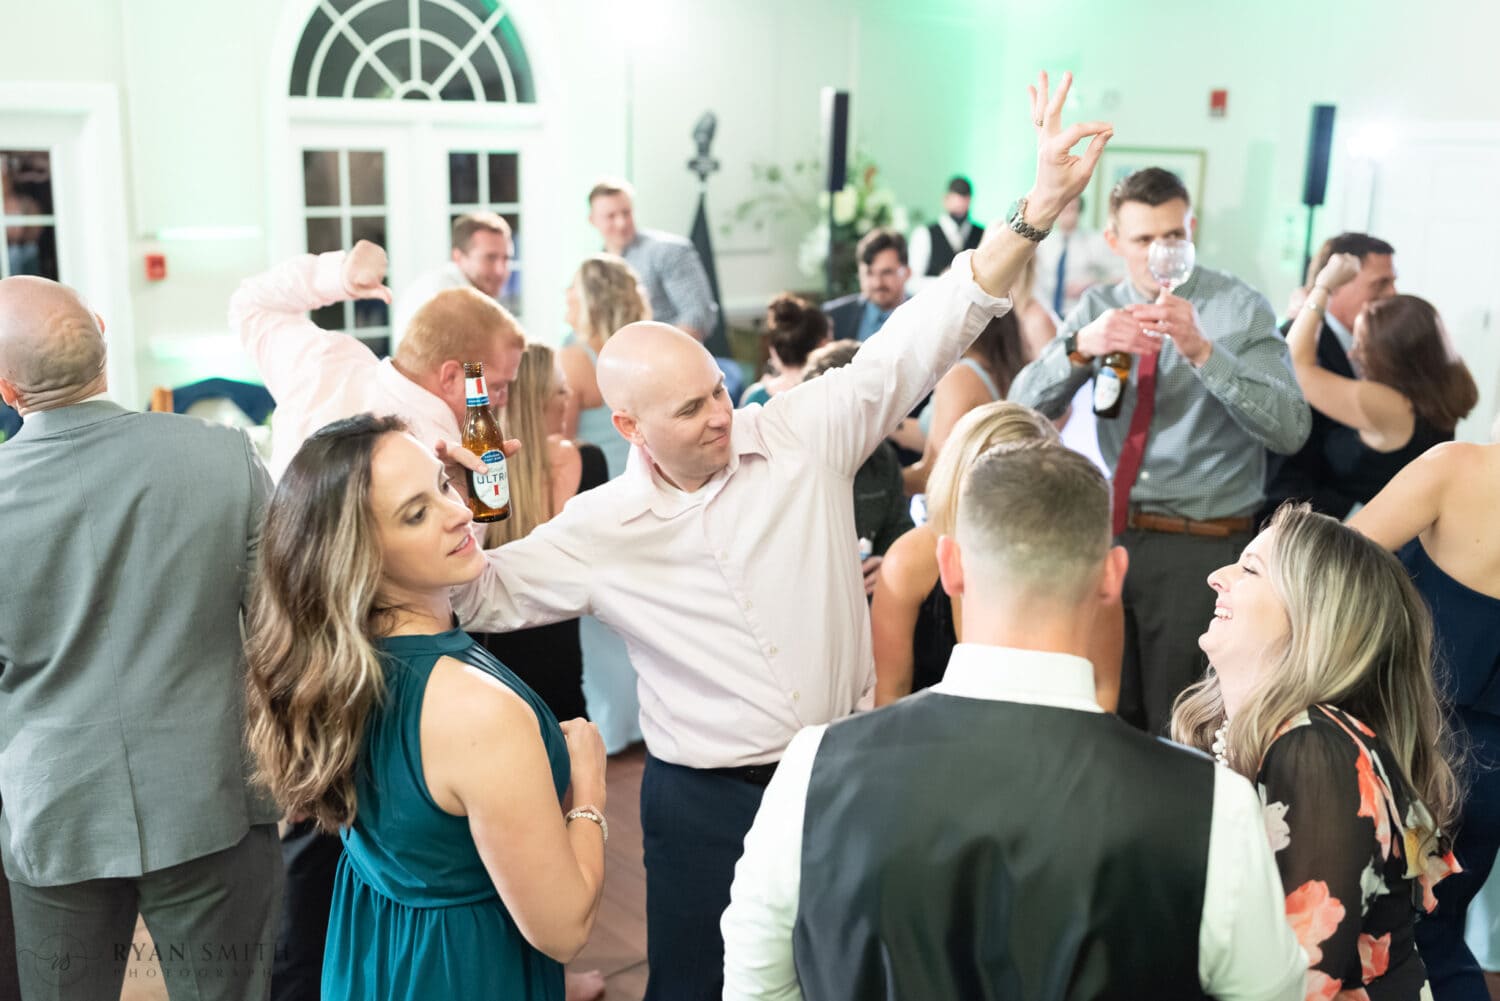 Getting wild on the dance floor - Kimbels at Wachesaw Plantation